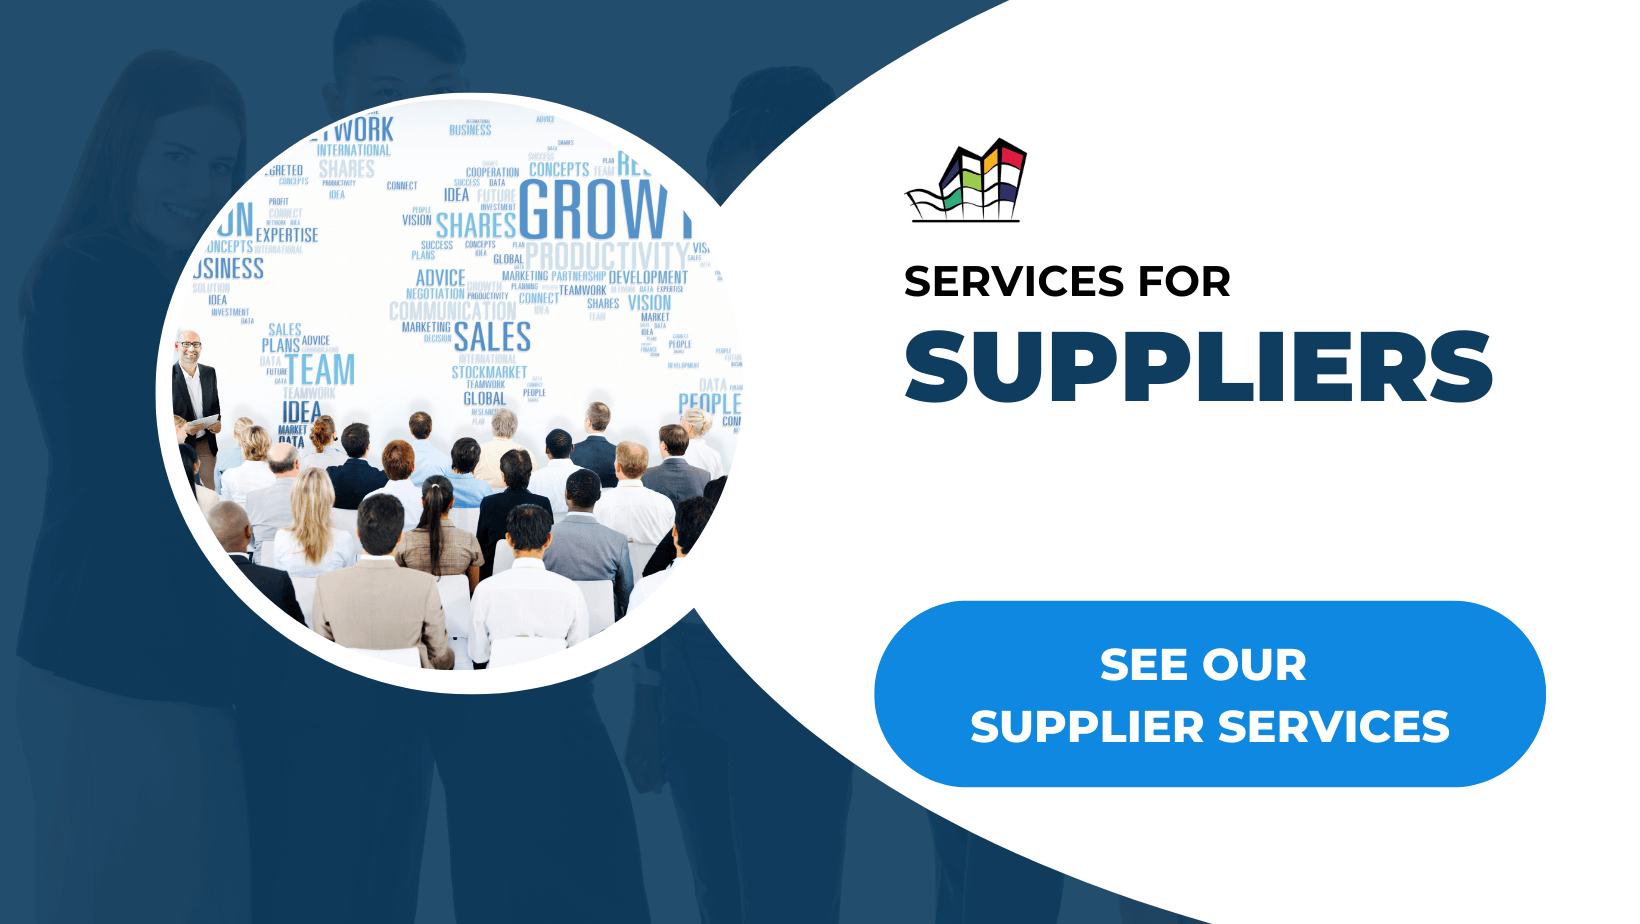 Services for Suppliers